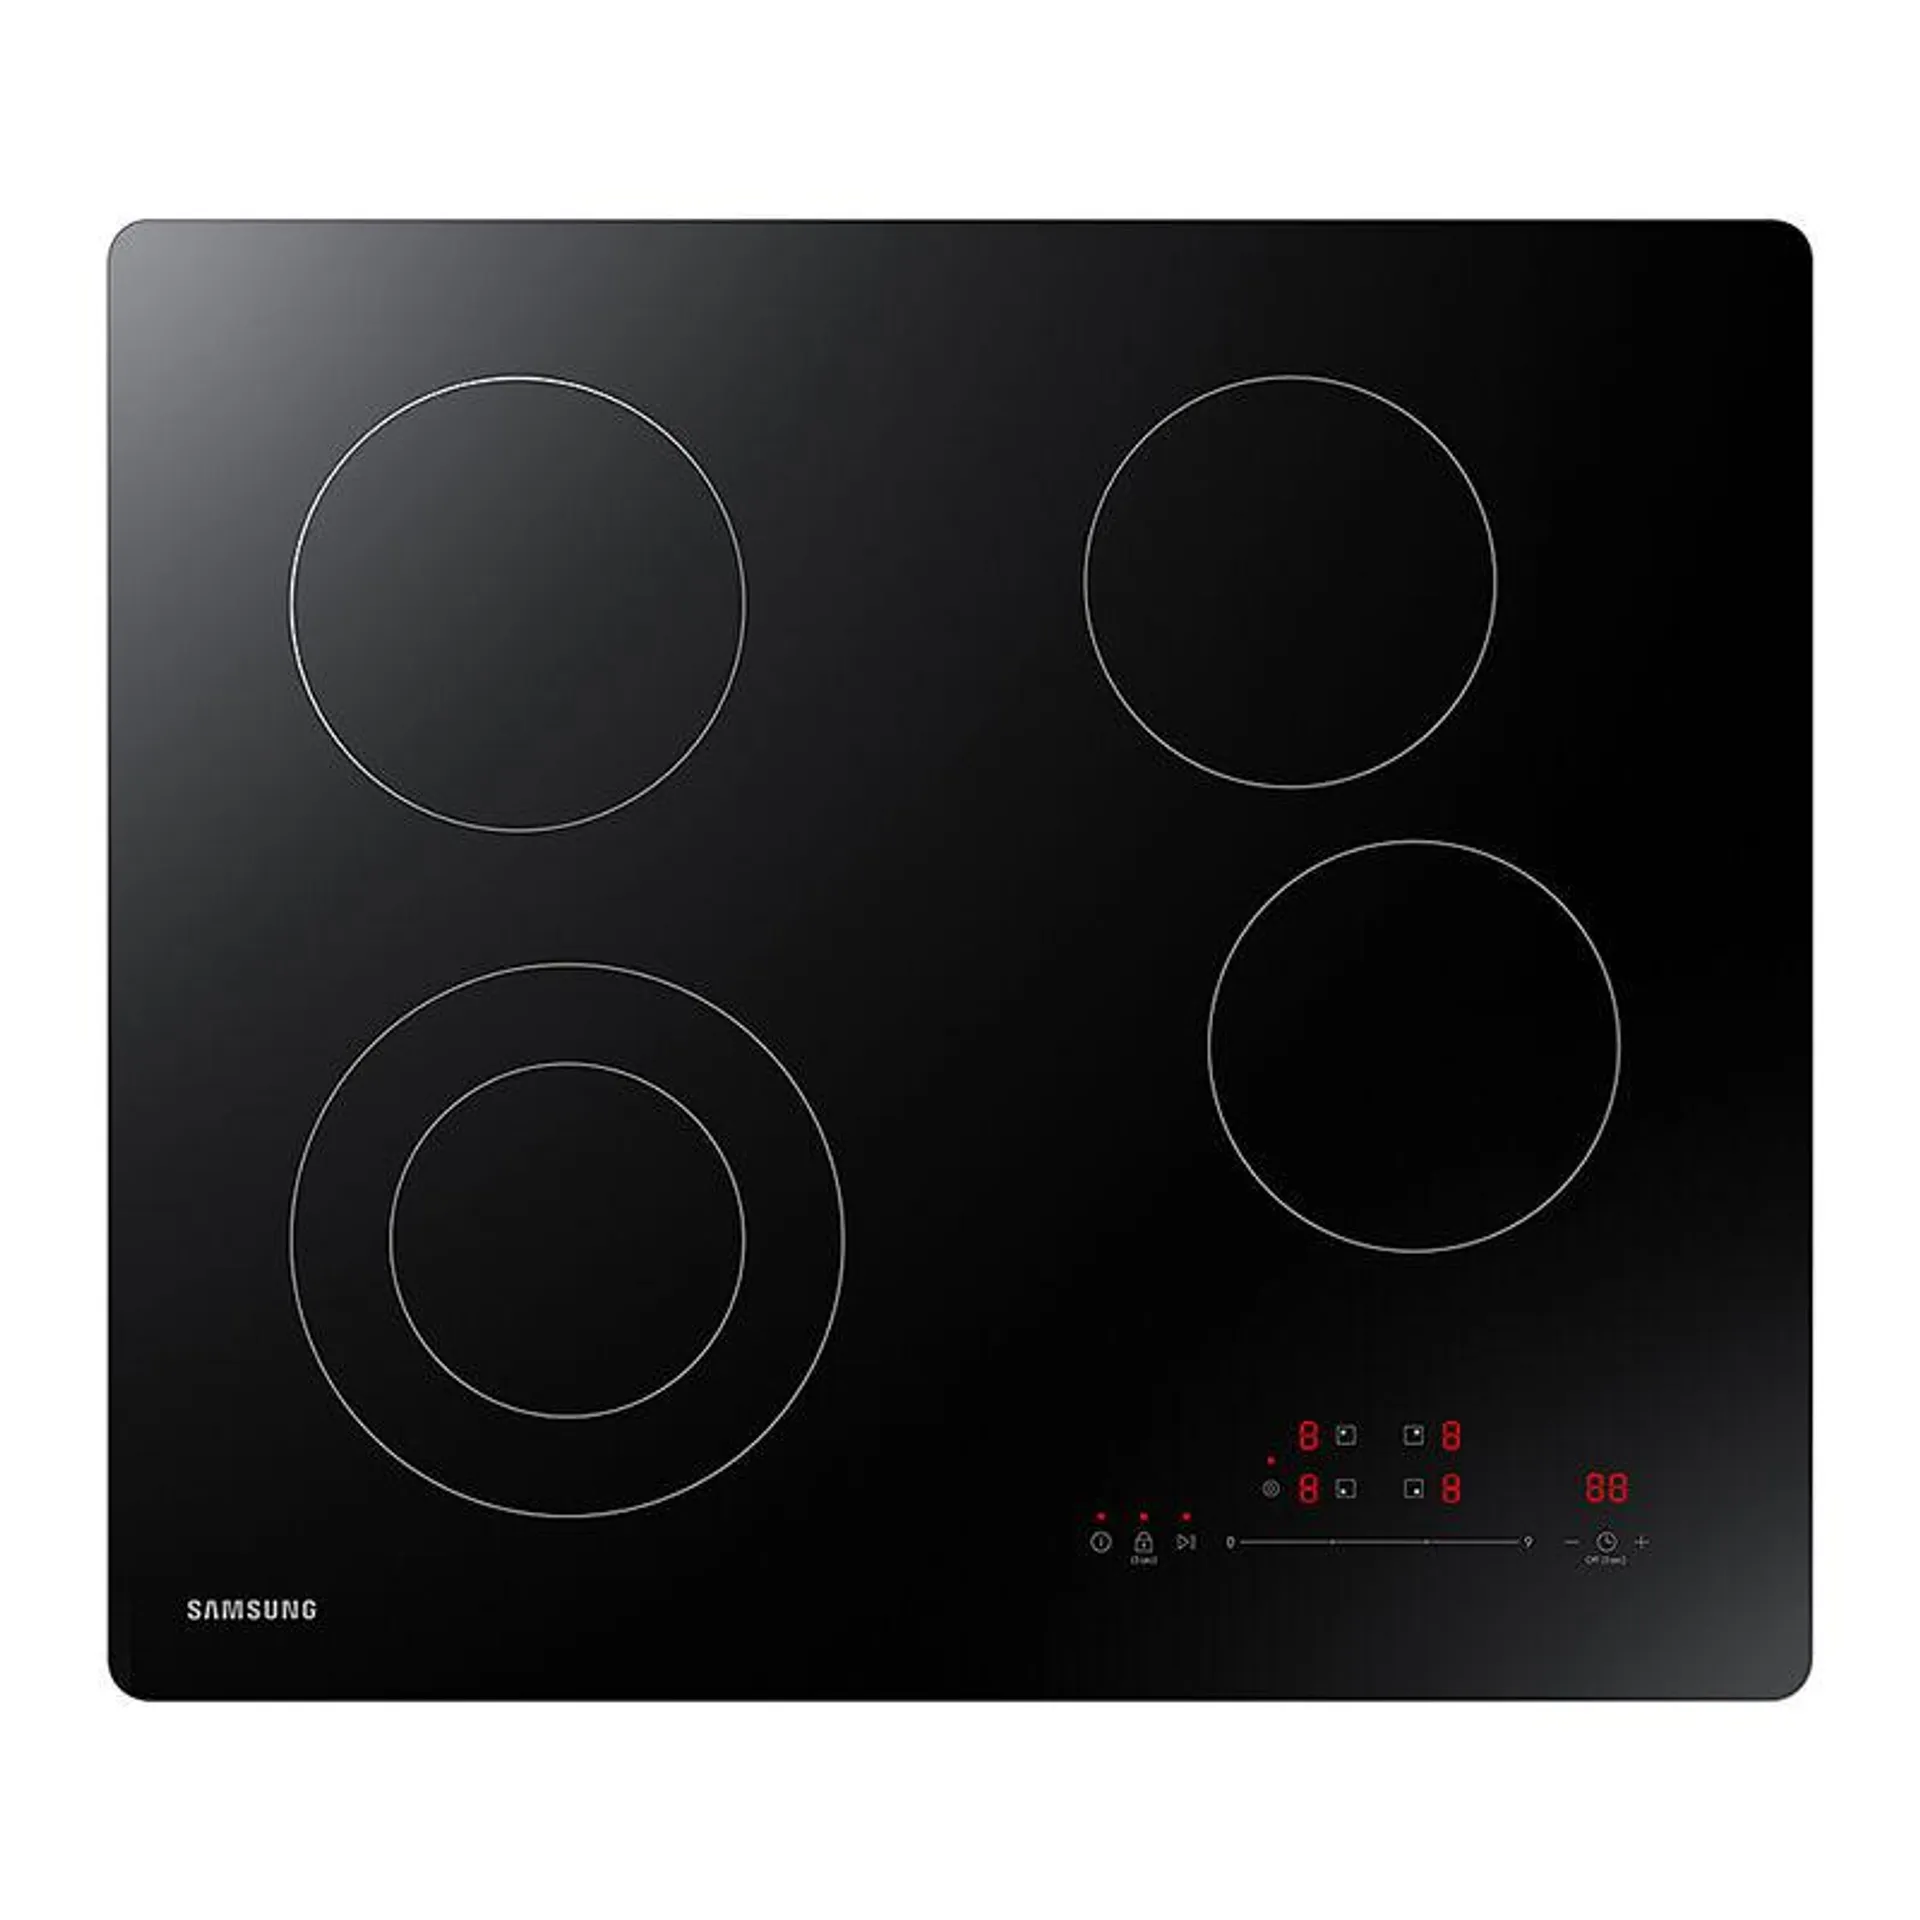 Samsung 24 in. Electric Cooktop with 4 Smoothtop Burners - Black